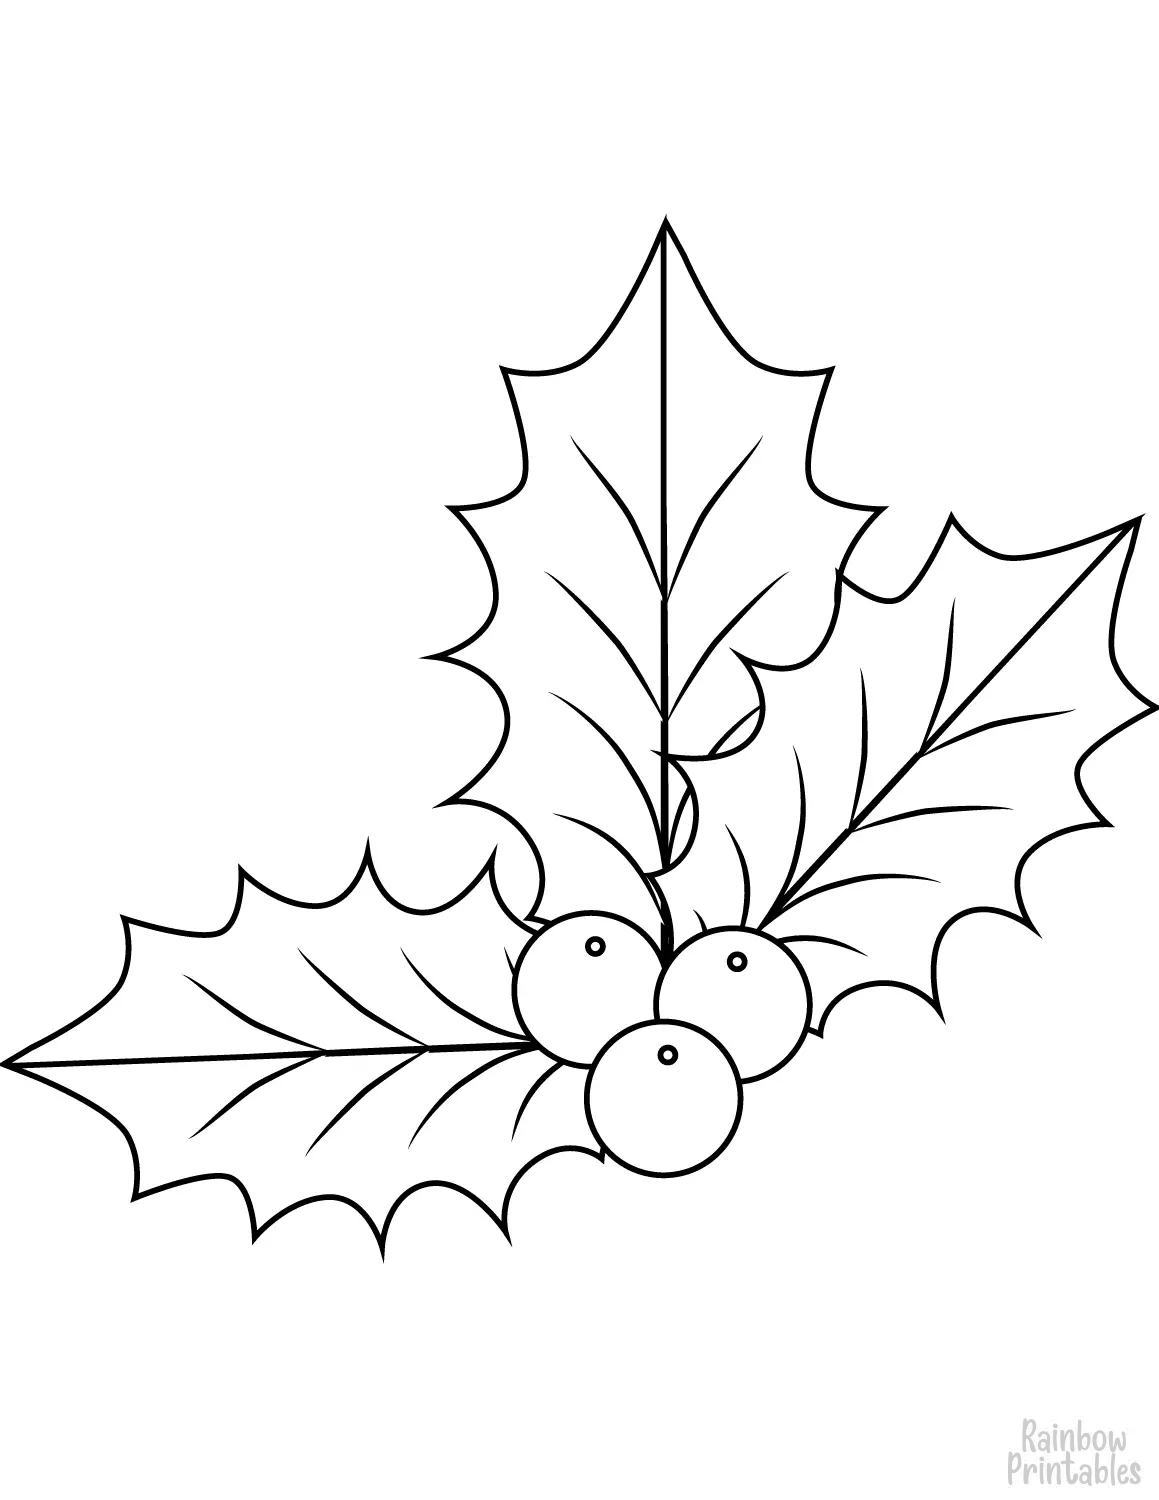 Xmas Holly Line Drawing Doodle Coloring Book Page Sheets for Kids Activity